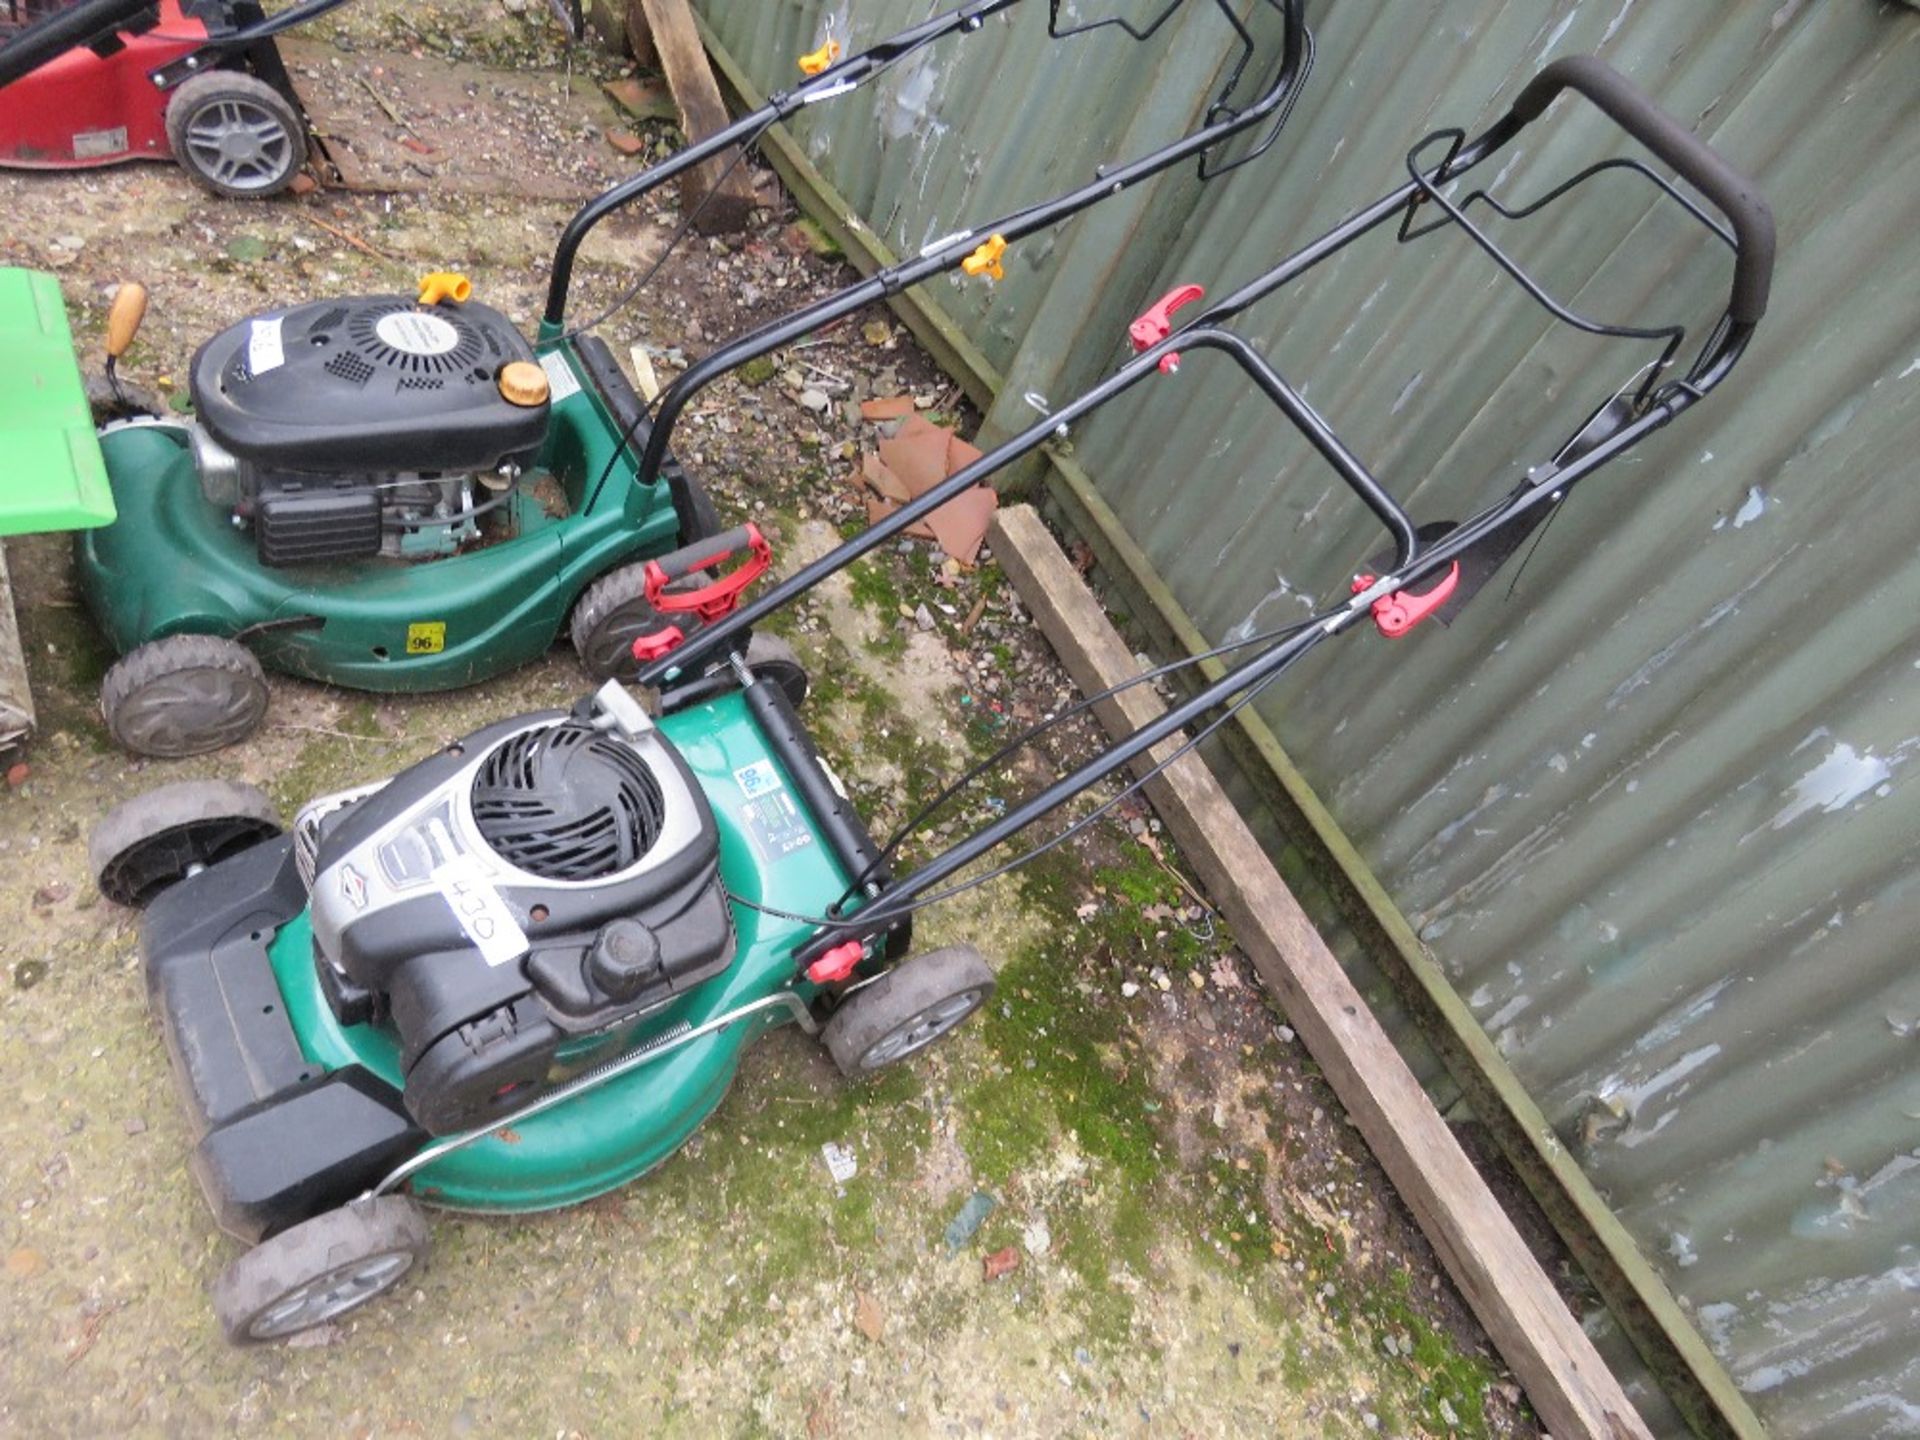 QUALCAST PETROL ENGINED LAWNMOWER. NO COLLECTOR. THIS LOT IS SOLD UNDER THE AUCTIONEERS MARGIN S